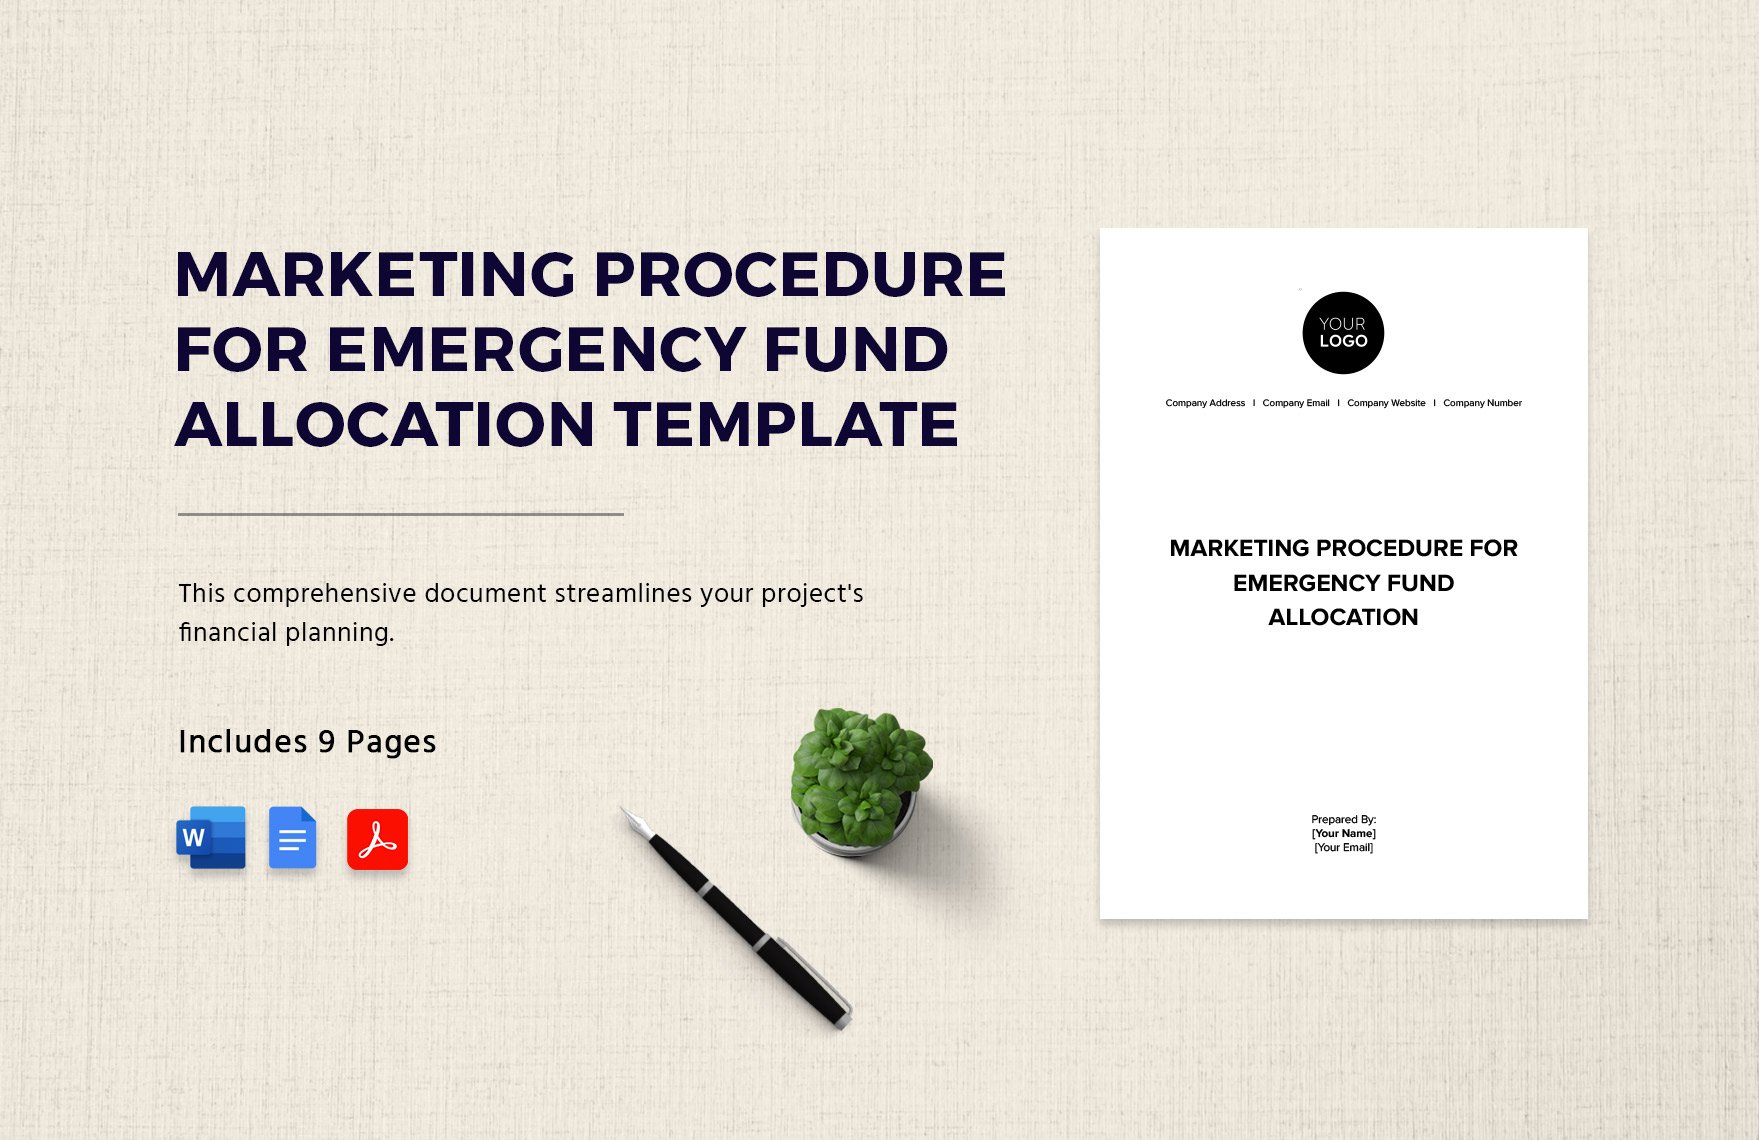 Marketing Procedure for Emergency Fund Allocation Template